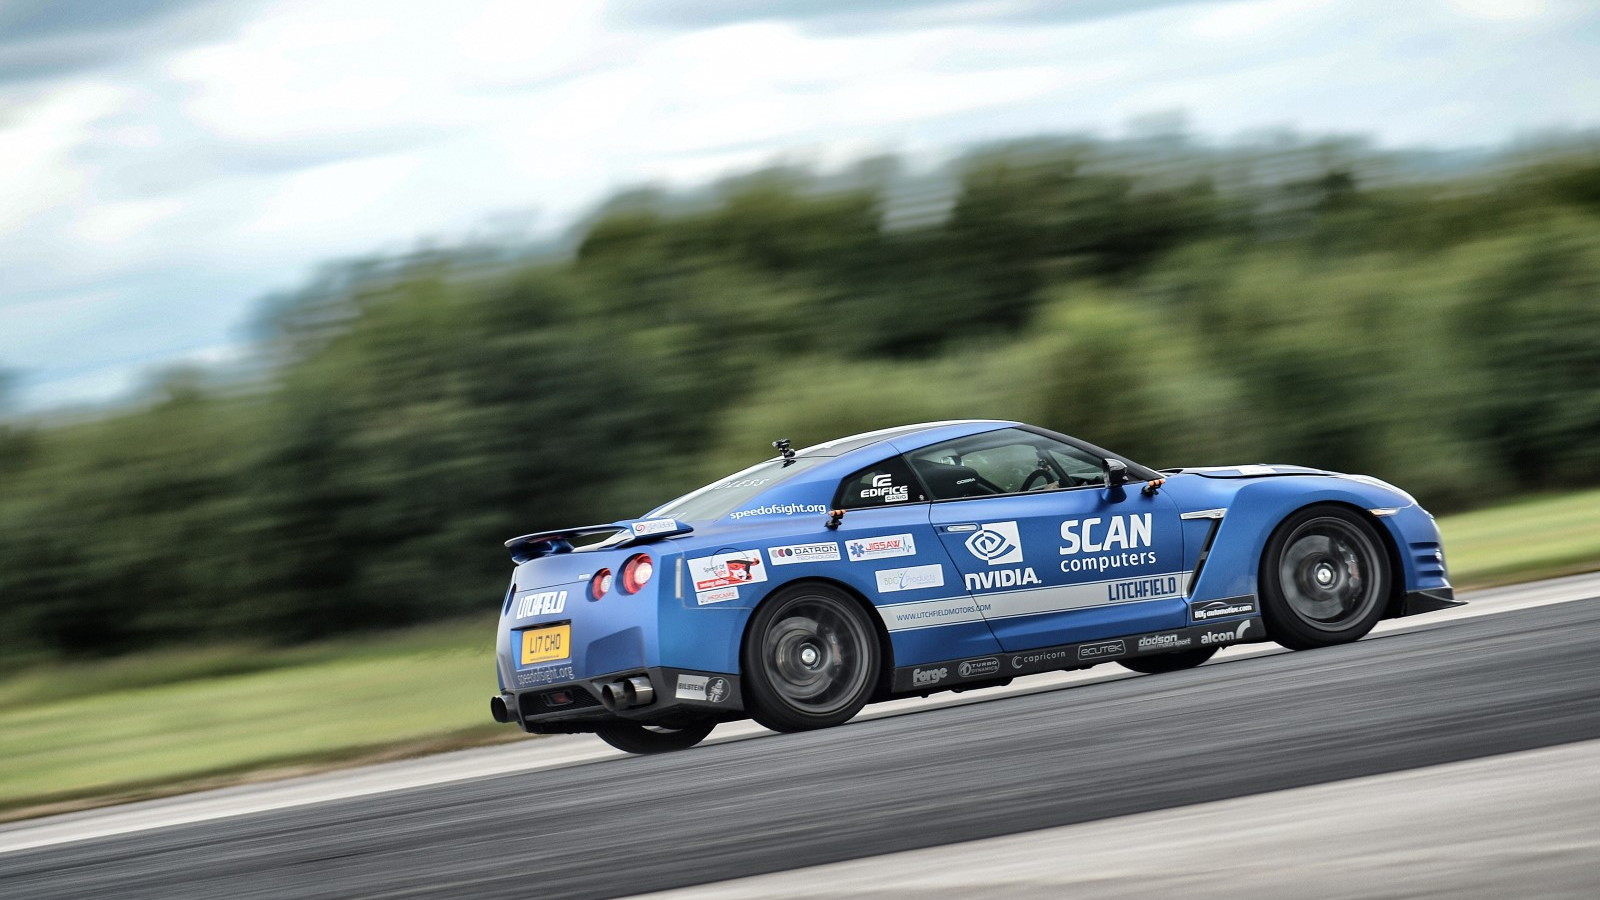 Mike Newman sets new blind land speed record in a Litchfield Nissan GT-R